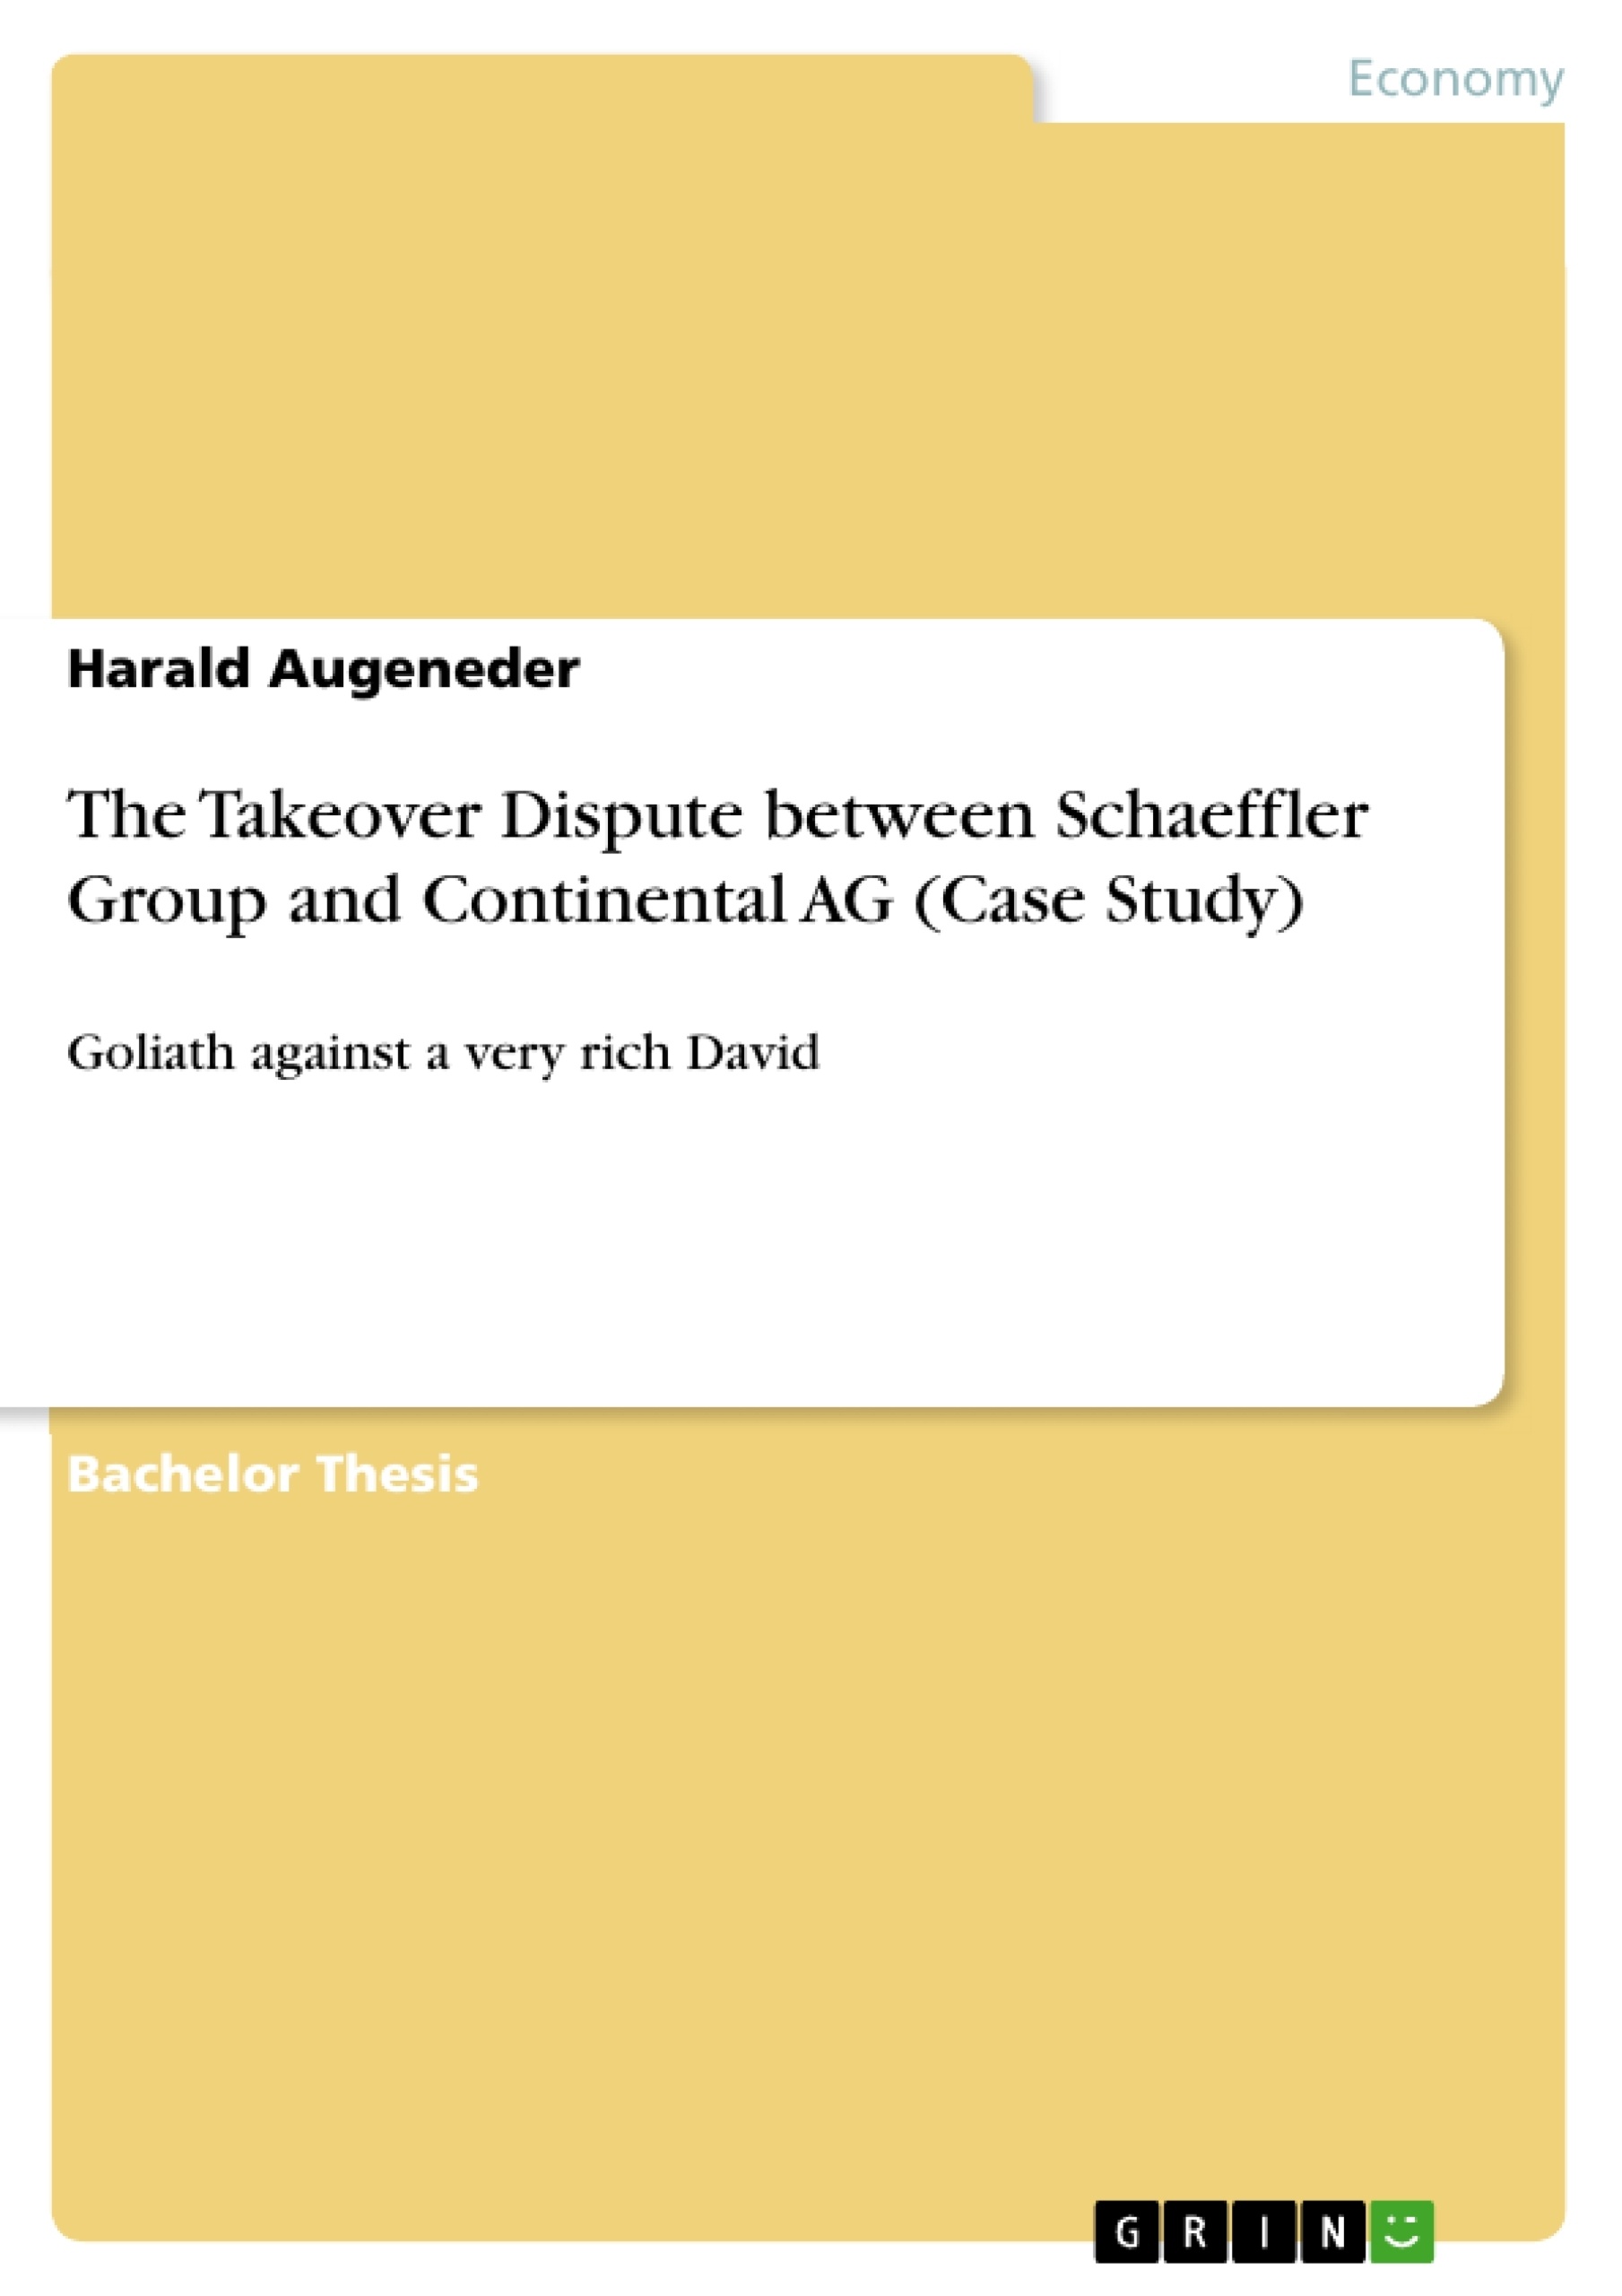 Title: The Takeover Dispute between Schaeffler Group and Continental AG (Case Study)